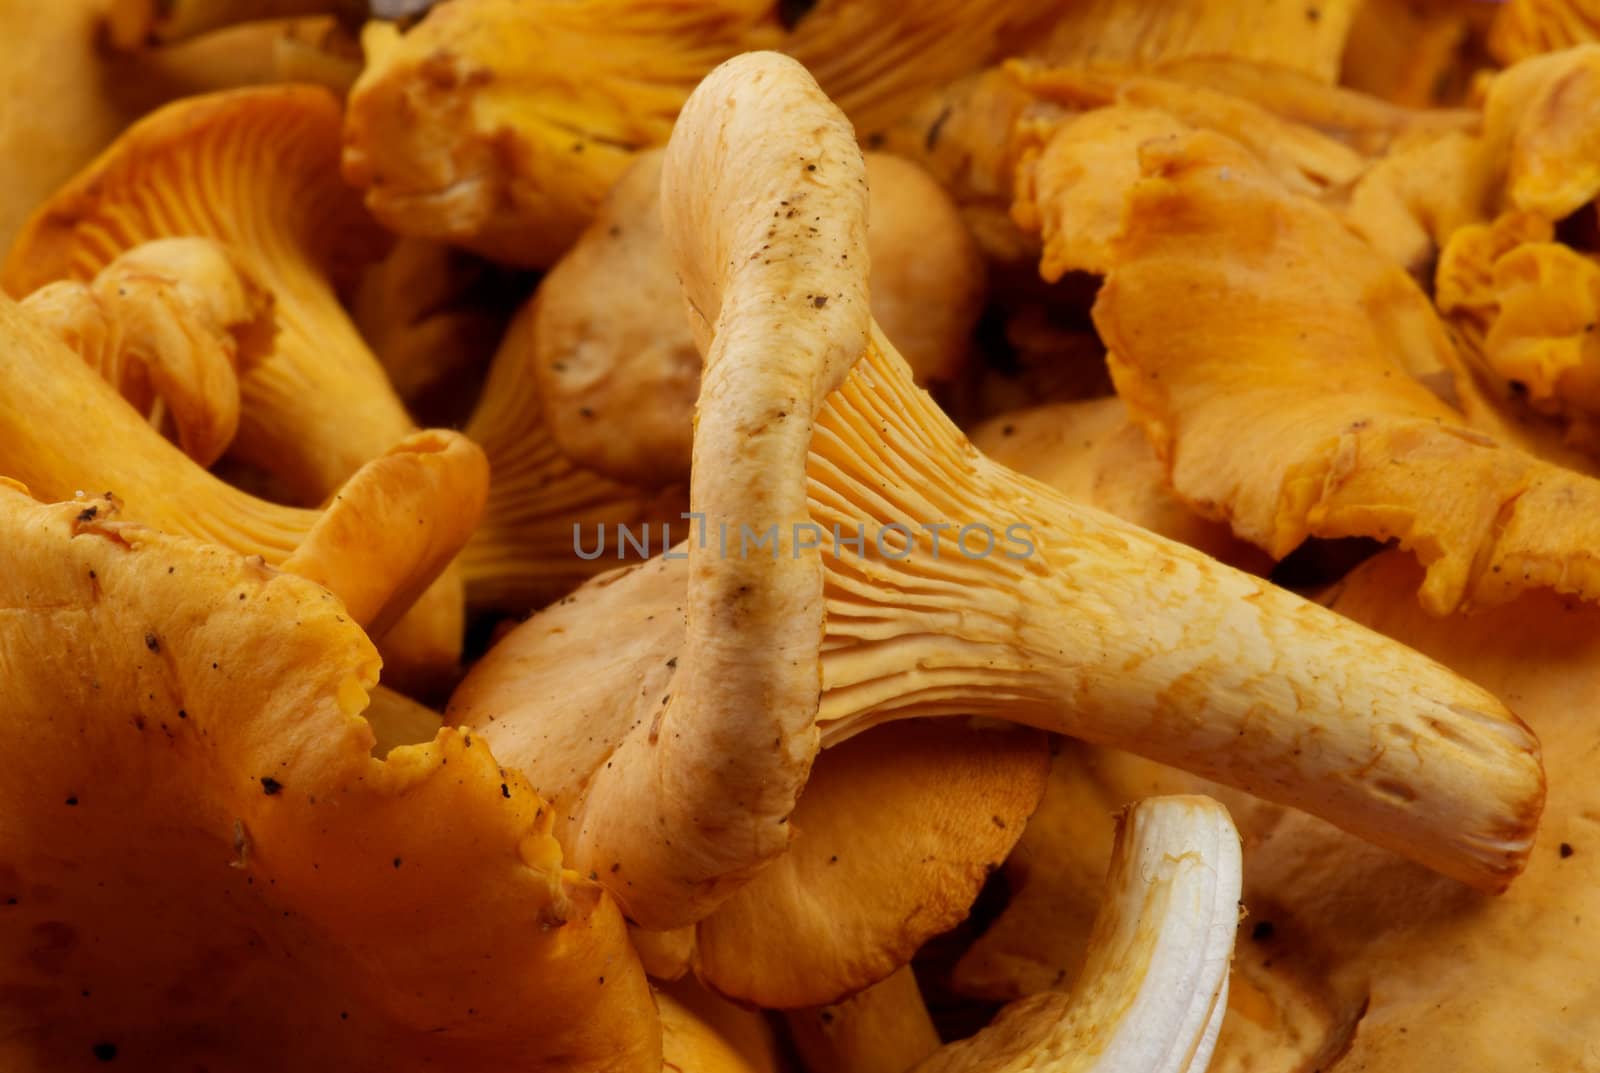 Background of Perfect Fresh Raw Chanterelles and One Big Chanterelle closeup